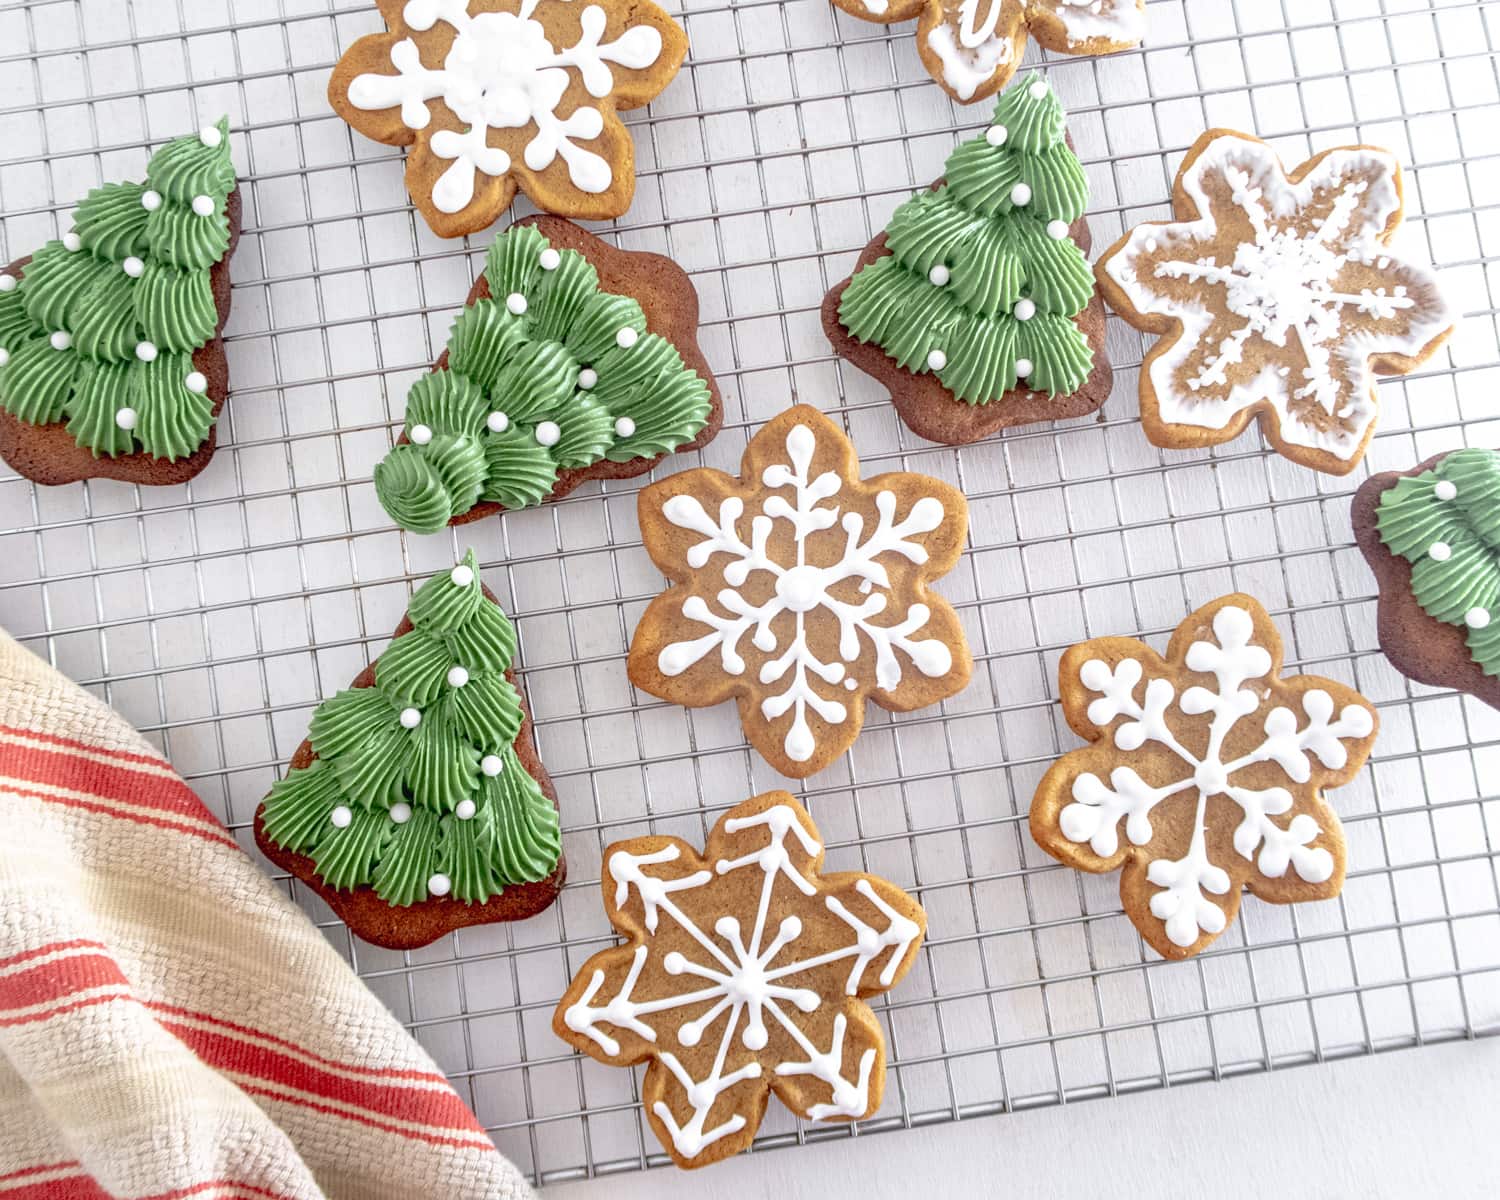 a selection of gingerbread cookies ( christmas tree, gingerbread person and snow flake) decorated with vegan royal icing on a wire drying rack